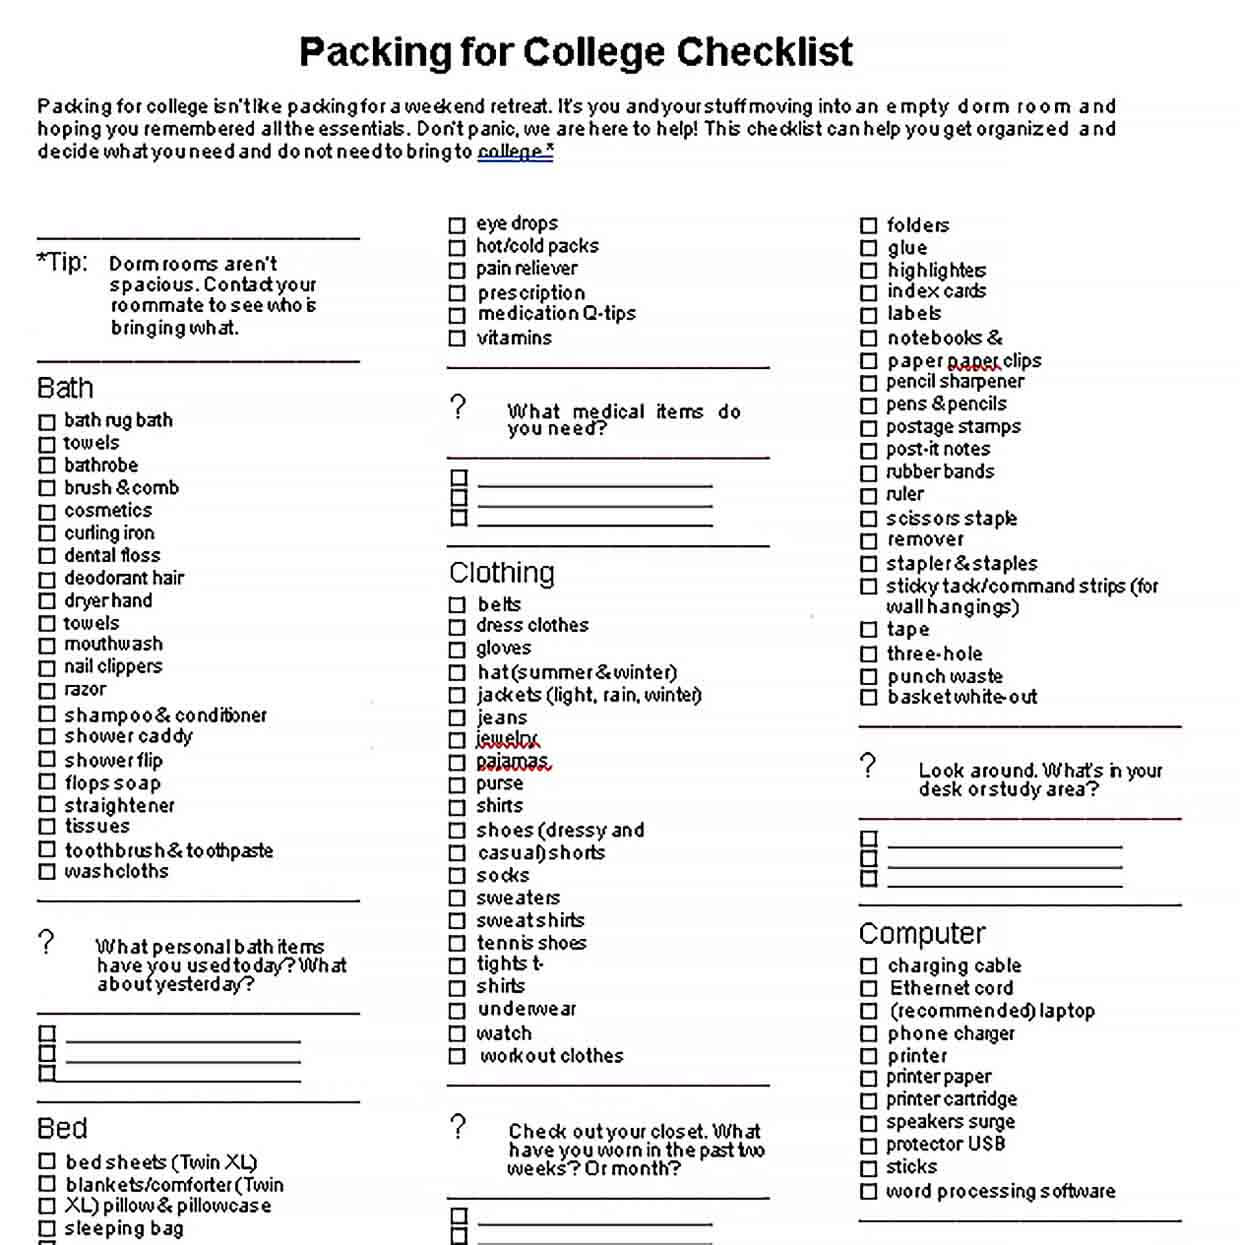 Sample Packing For College Checklist